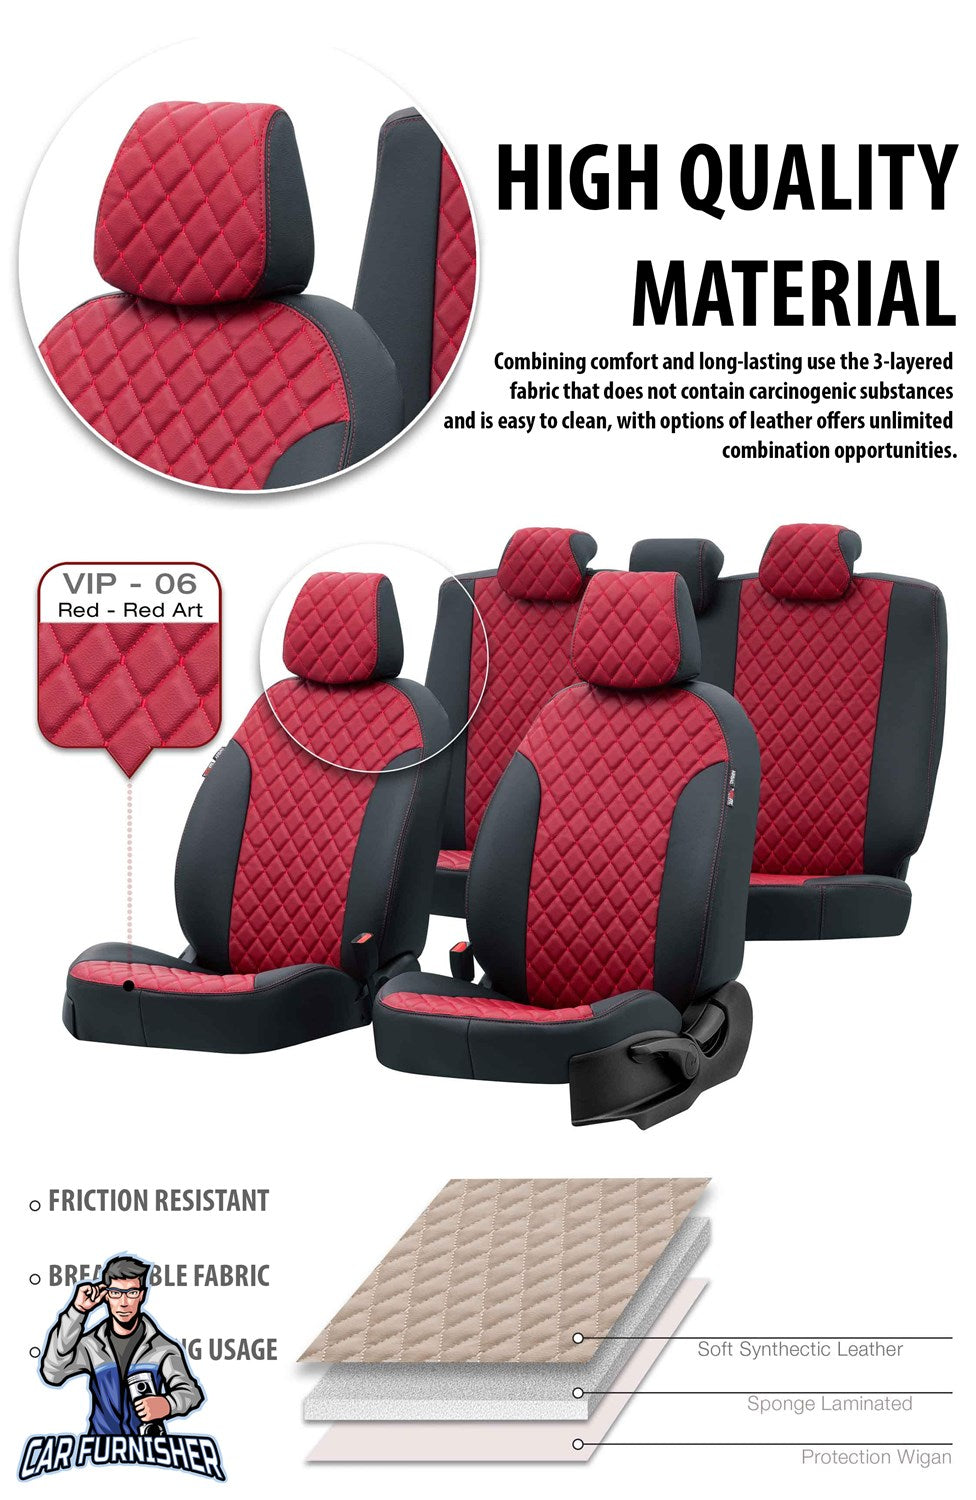 Ssangyong Korando Seat Covers Madrid Leather Design Smoked Leather